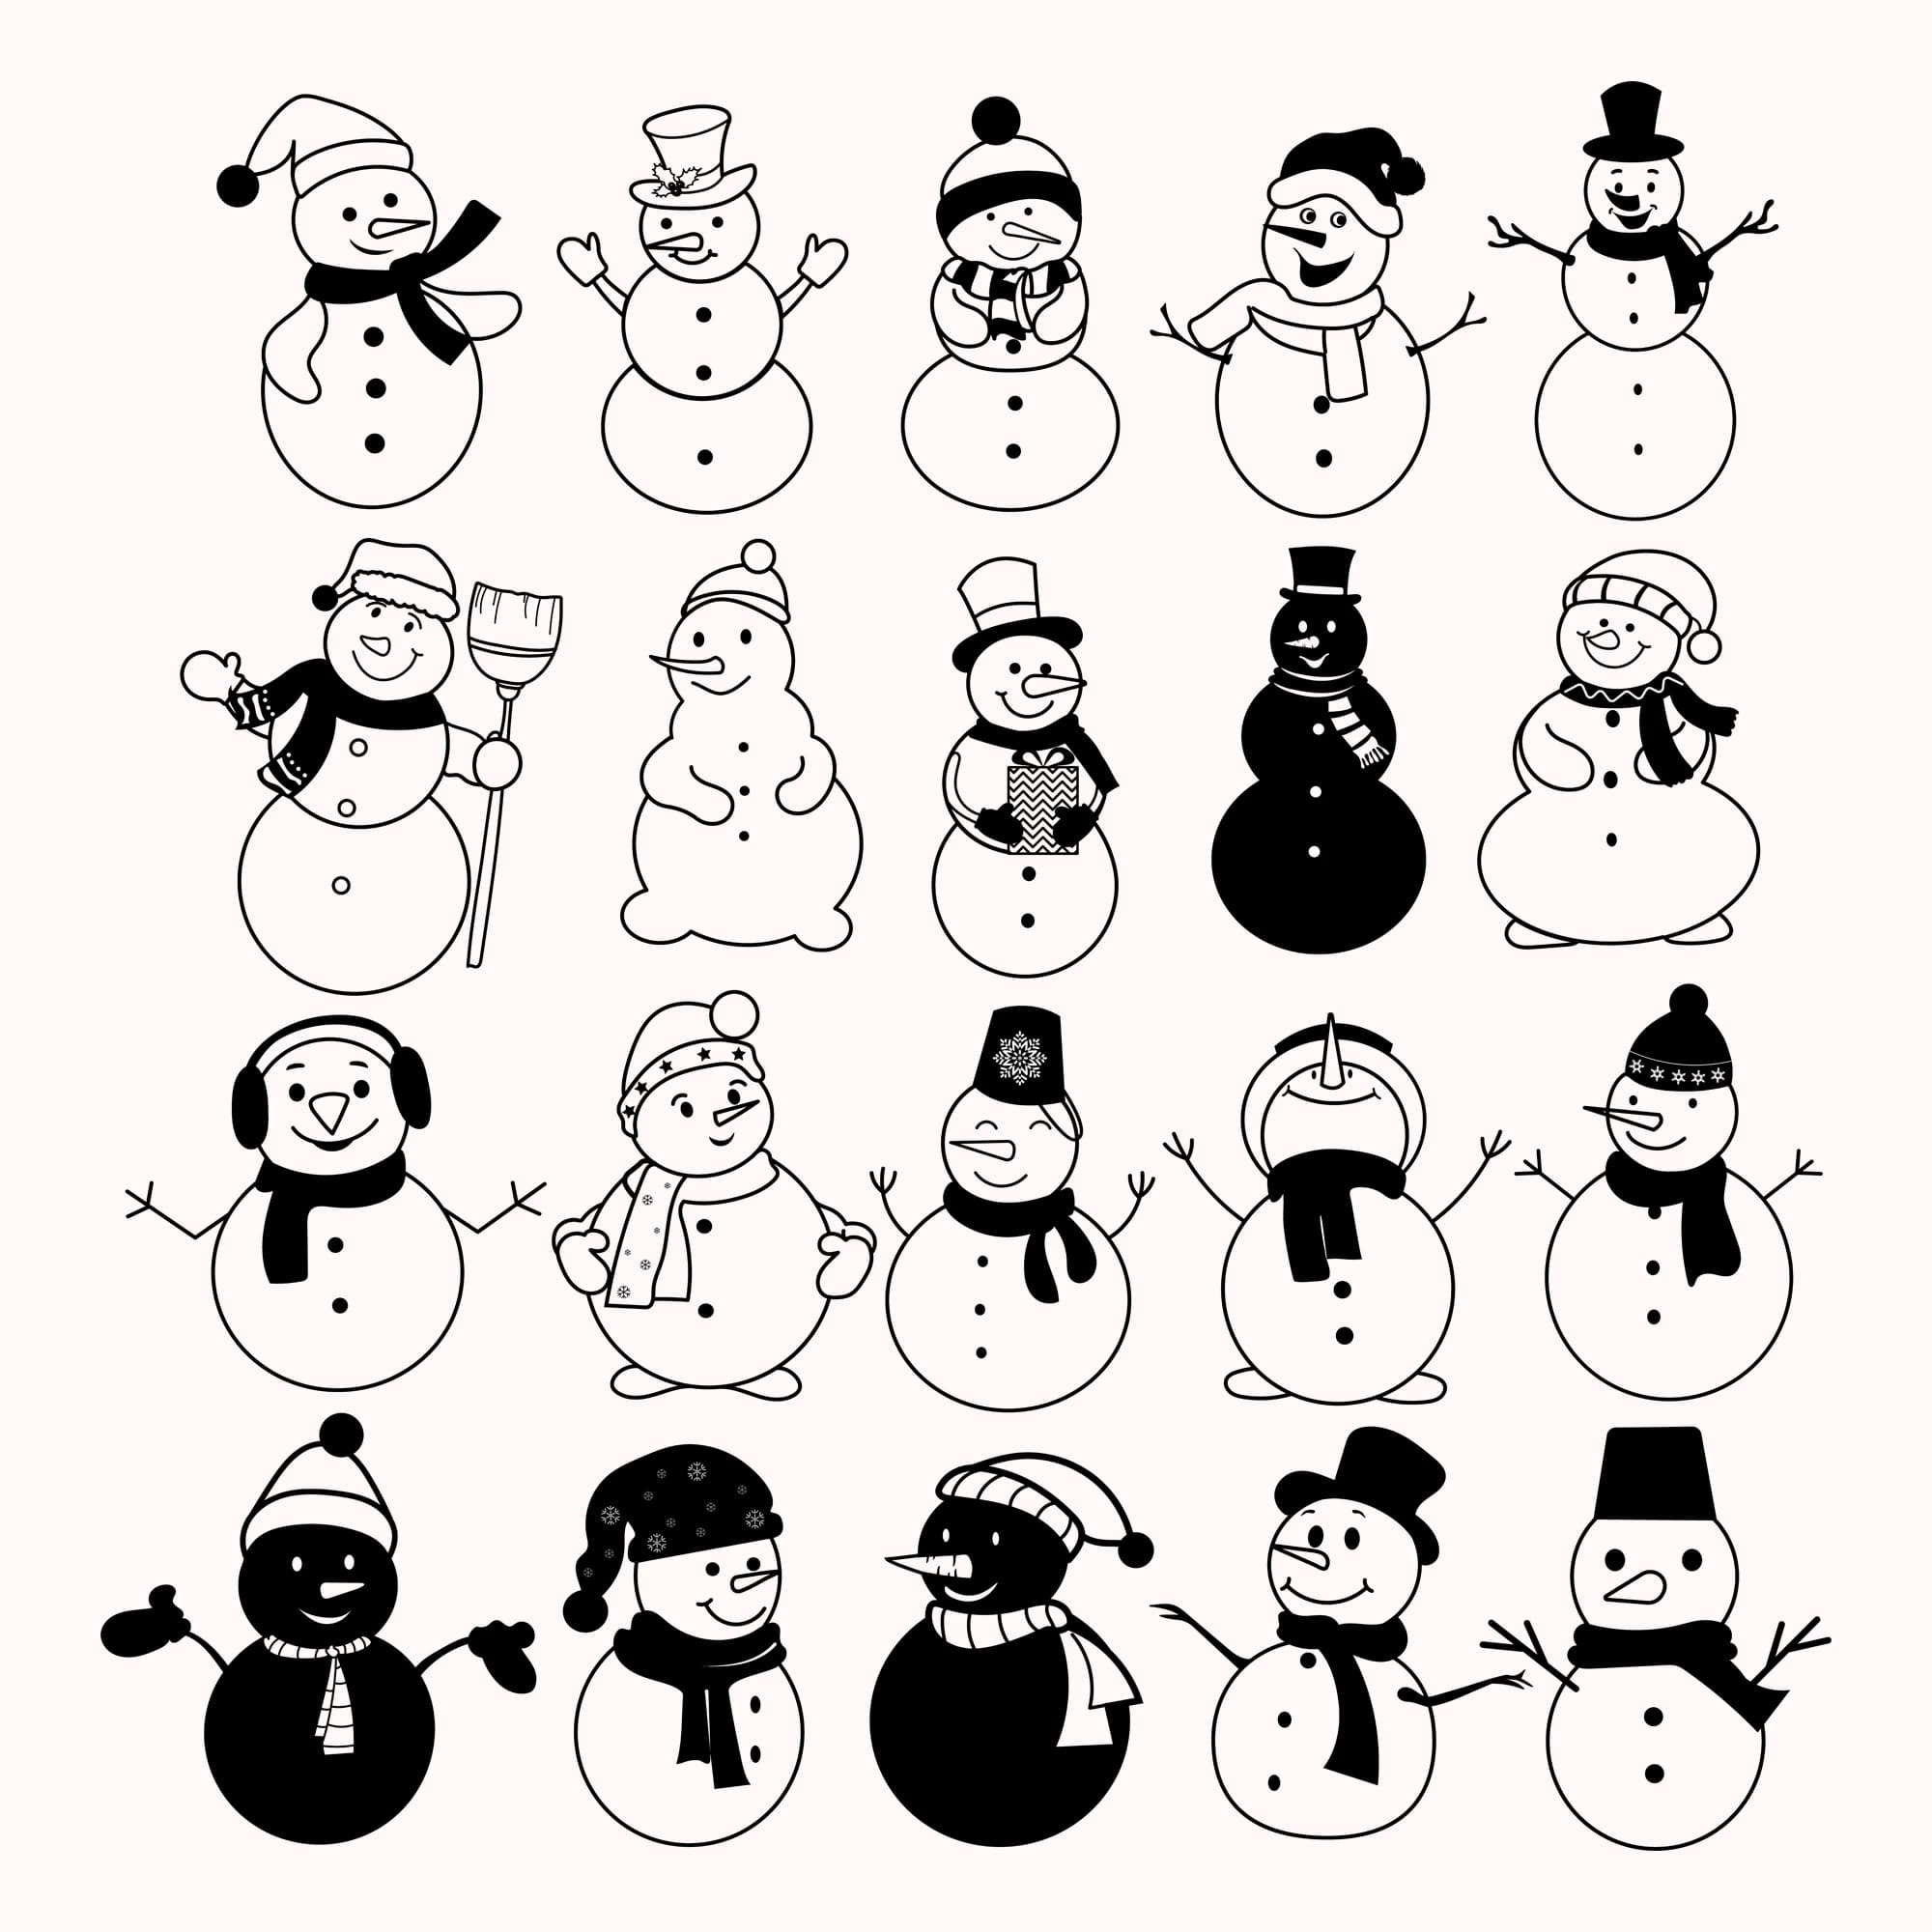 Christmas snowman clipart in outlined style.